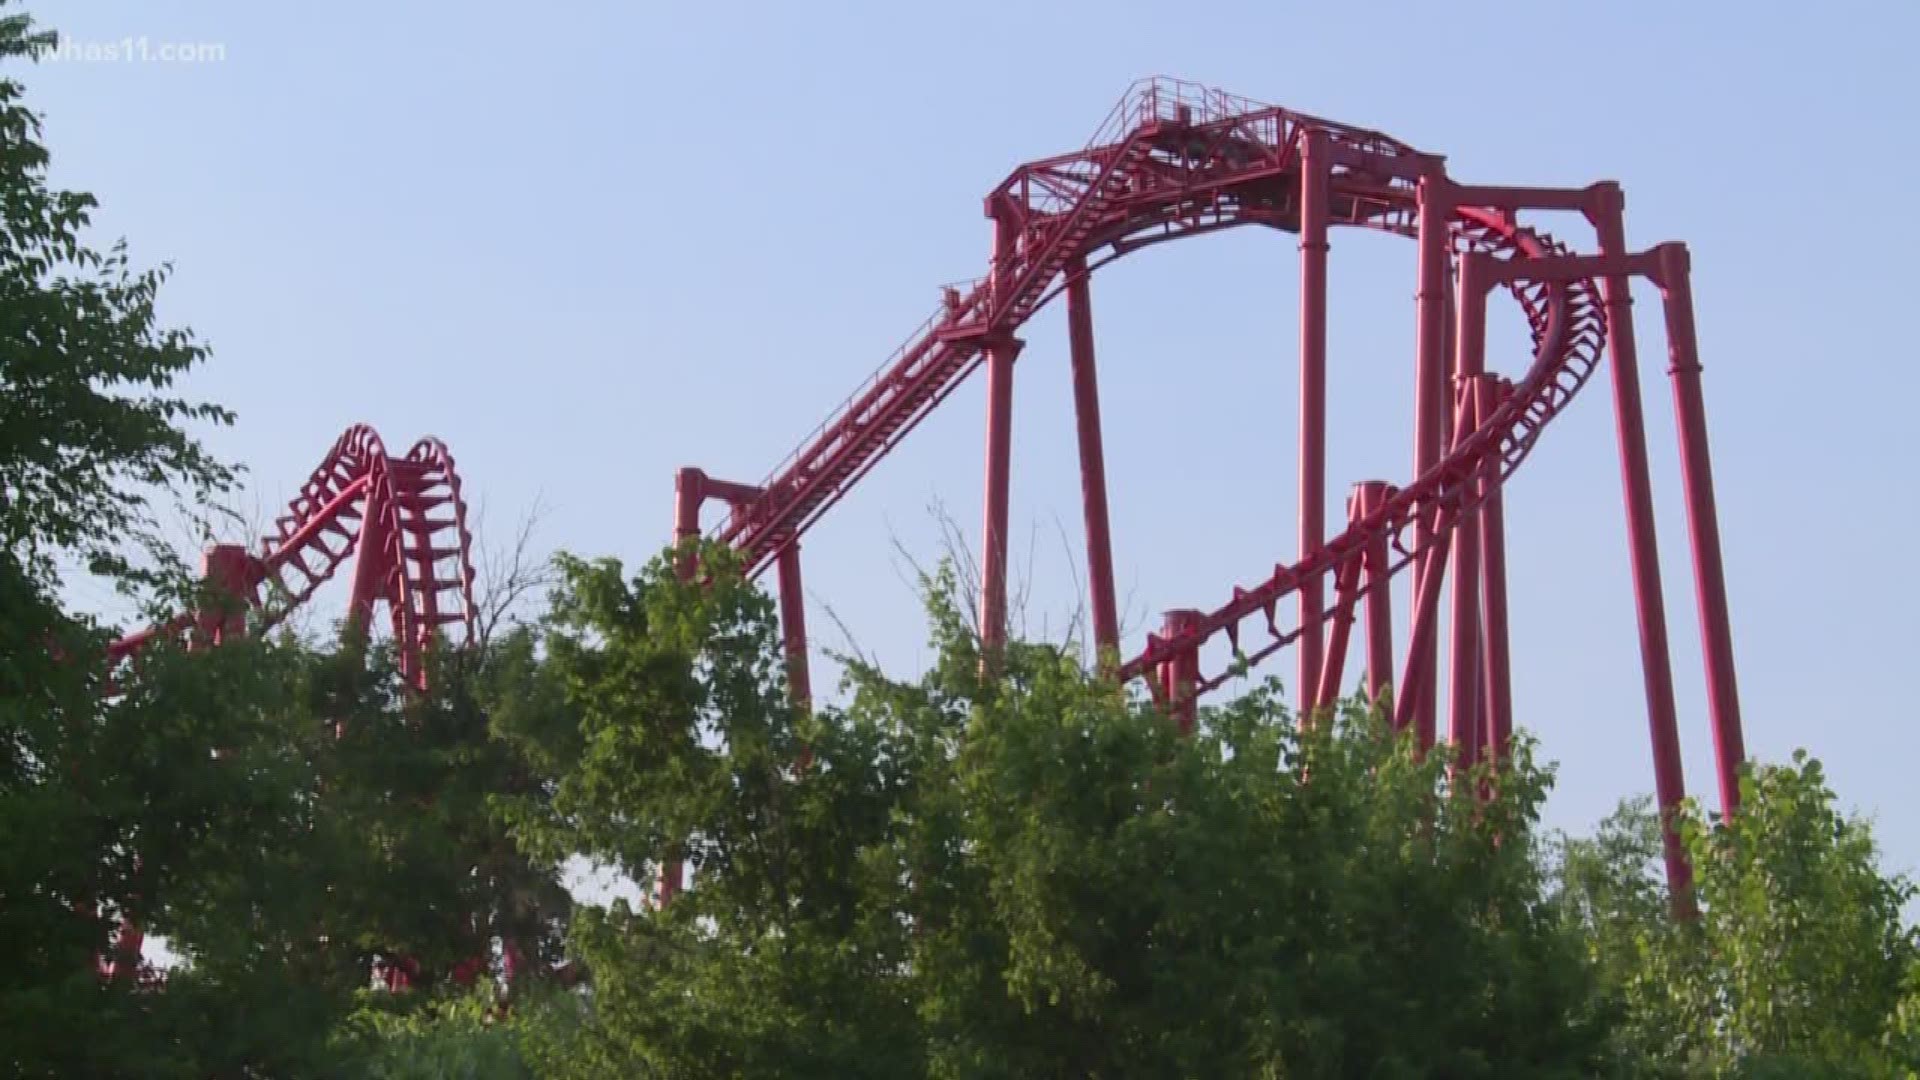 T3 coaster closed after incident, officials say